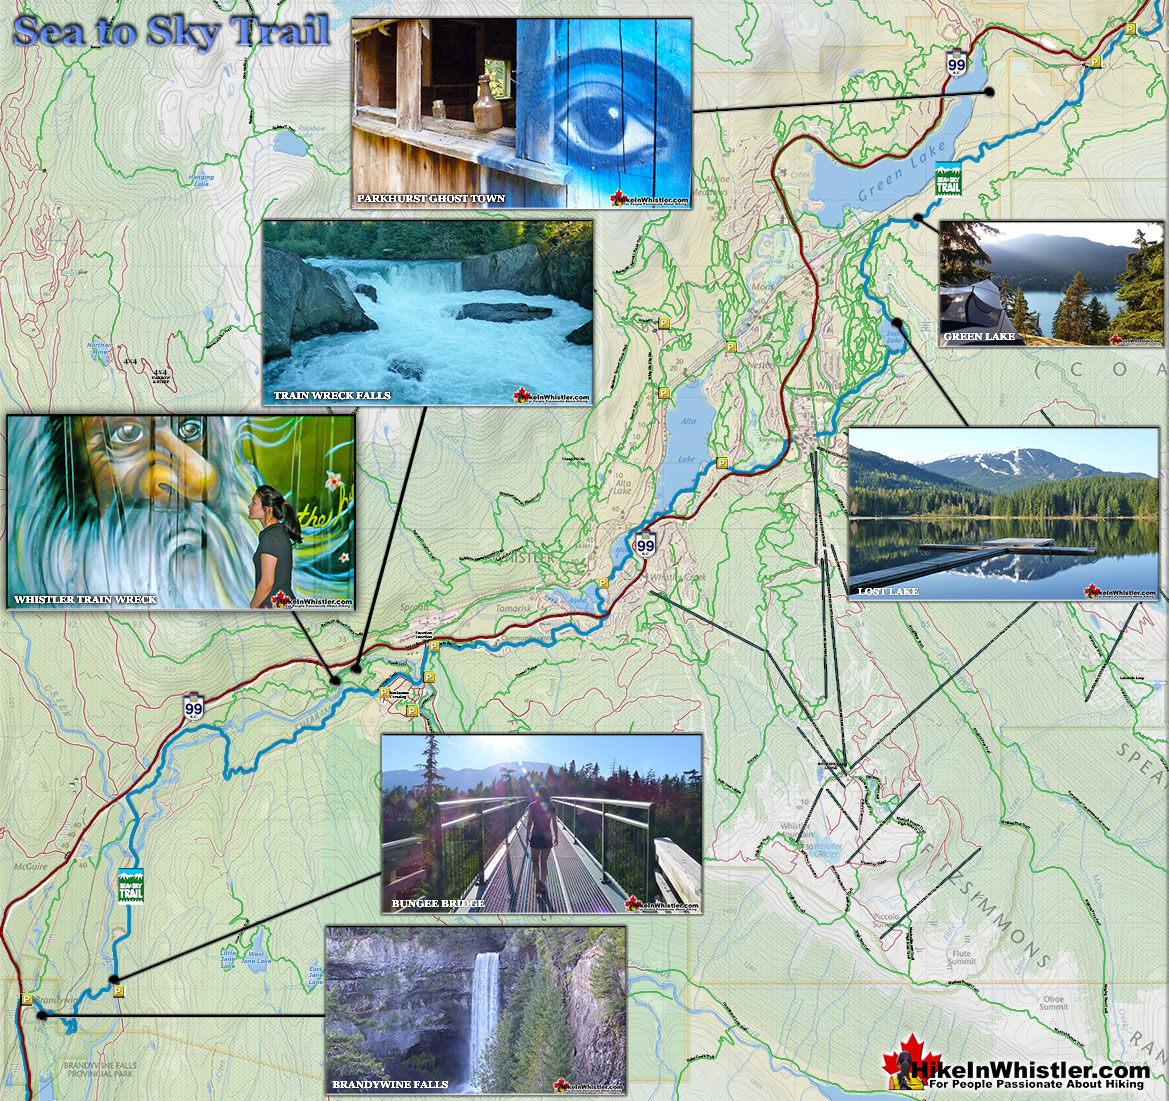 Sea to Sky Trail Map - Hike in Whistler